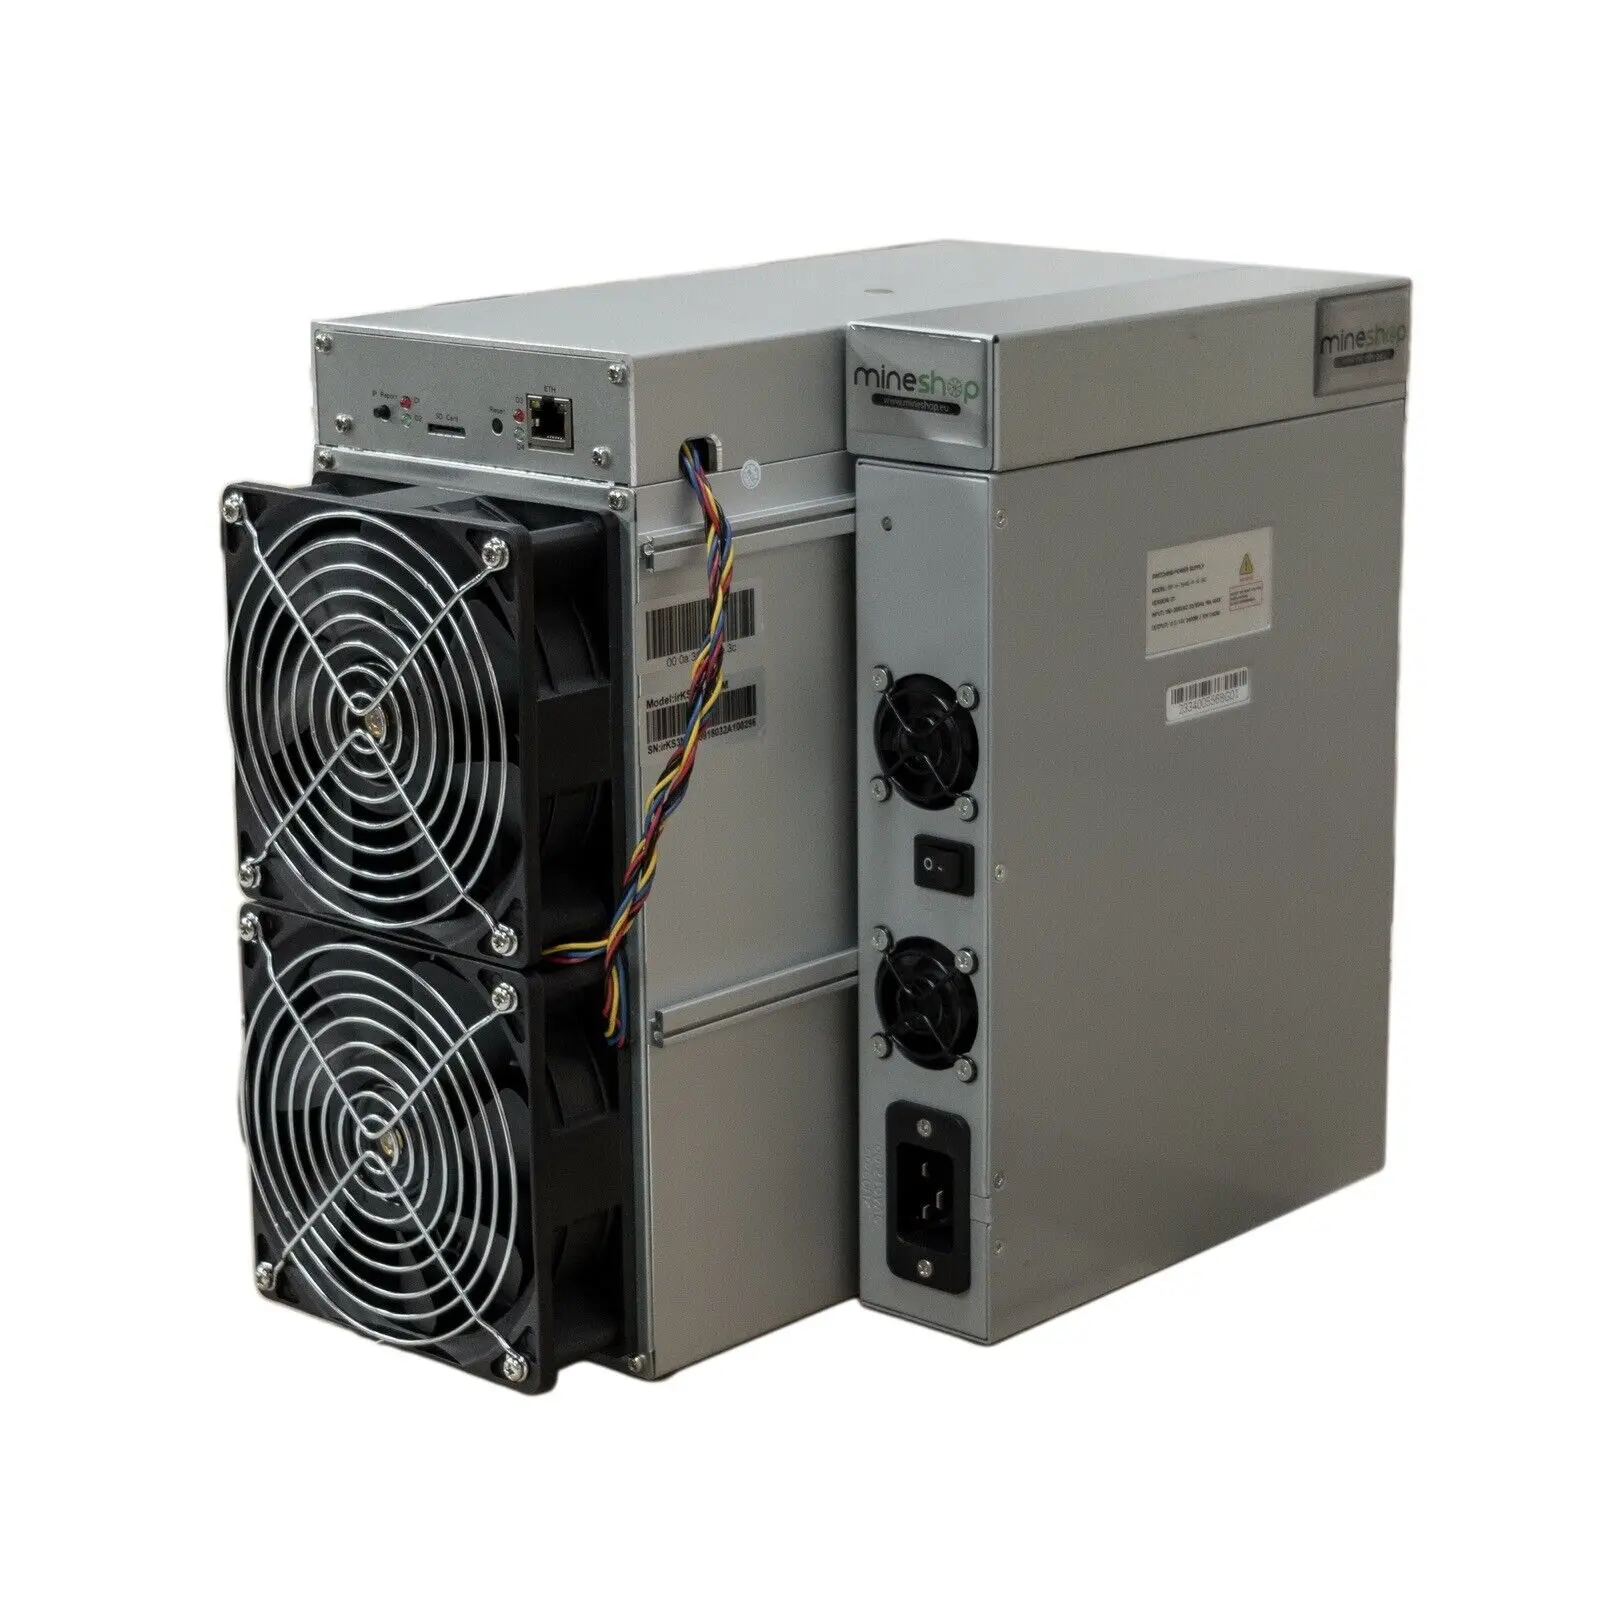 

Buy 2 get 1 free New ICERIVER KAS KS3M Asic Kaspa Miner 6Th/s±10% with Cord Ship by DHL